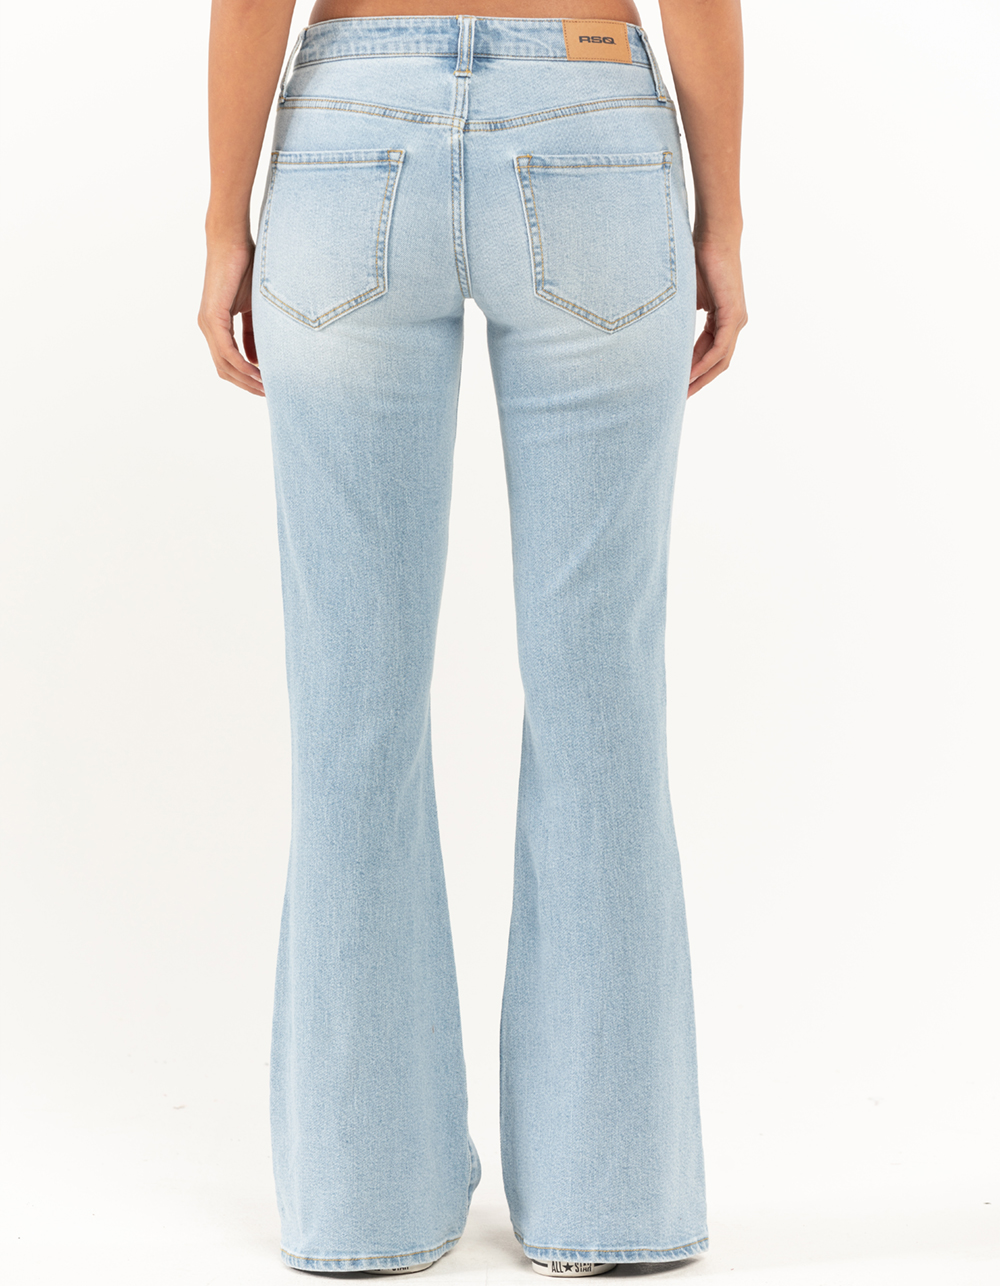 RSQ Womens Low Rise Flare Jeans - LIGHT WASH